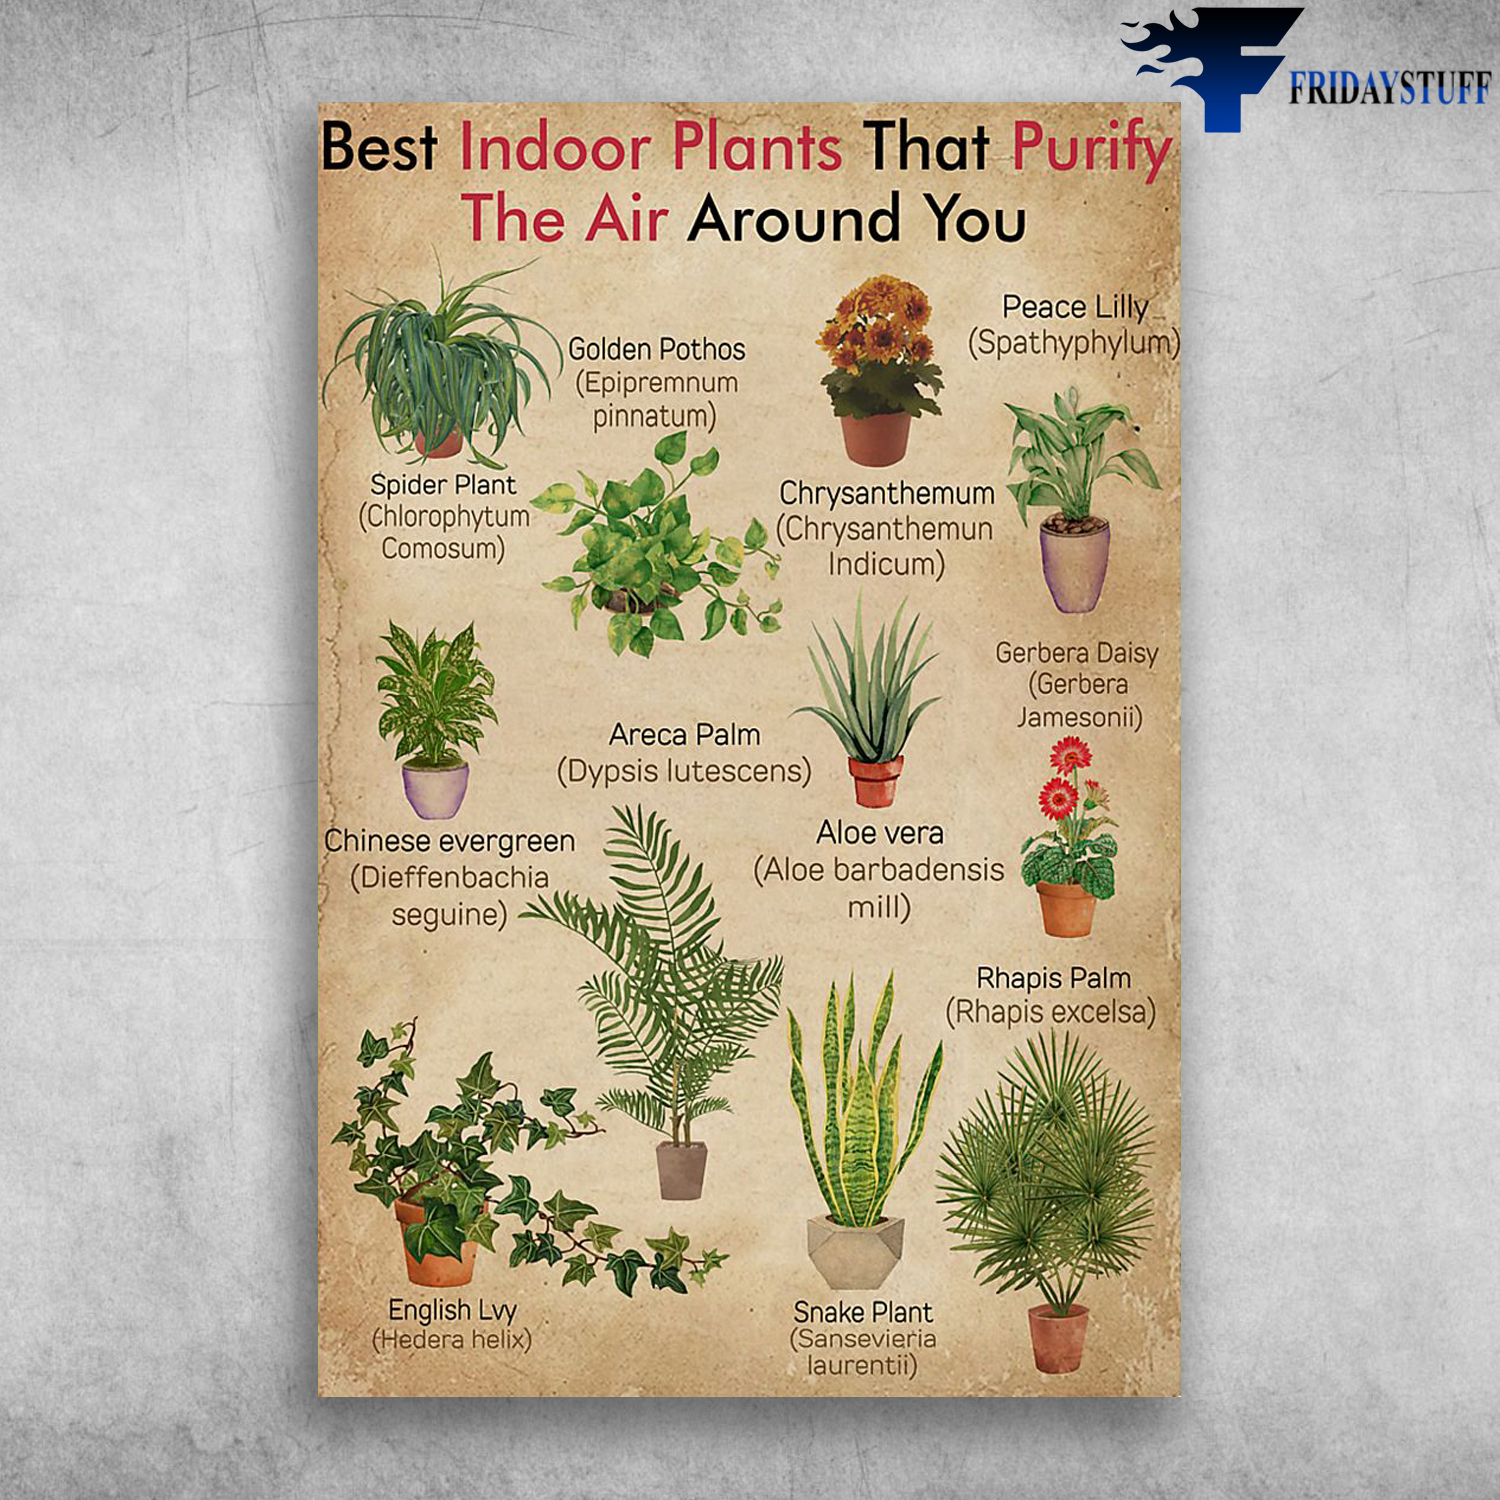 Best Indoor Plants That Purify The Air Around You